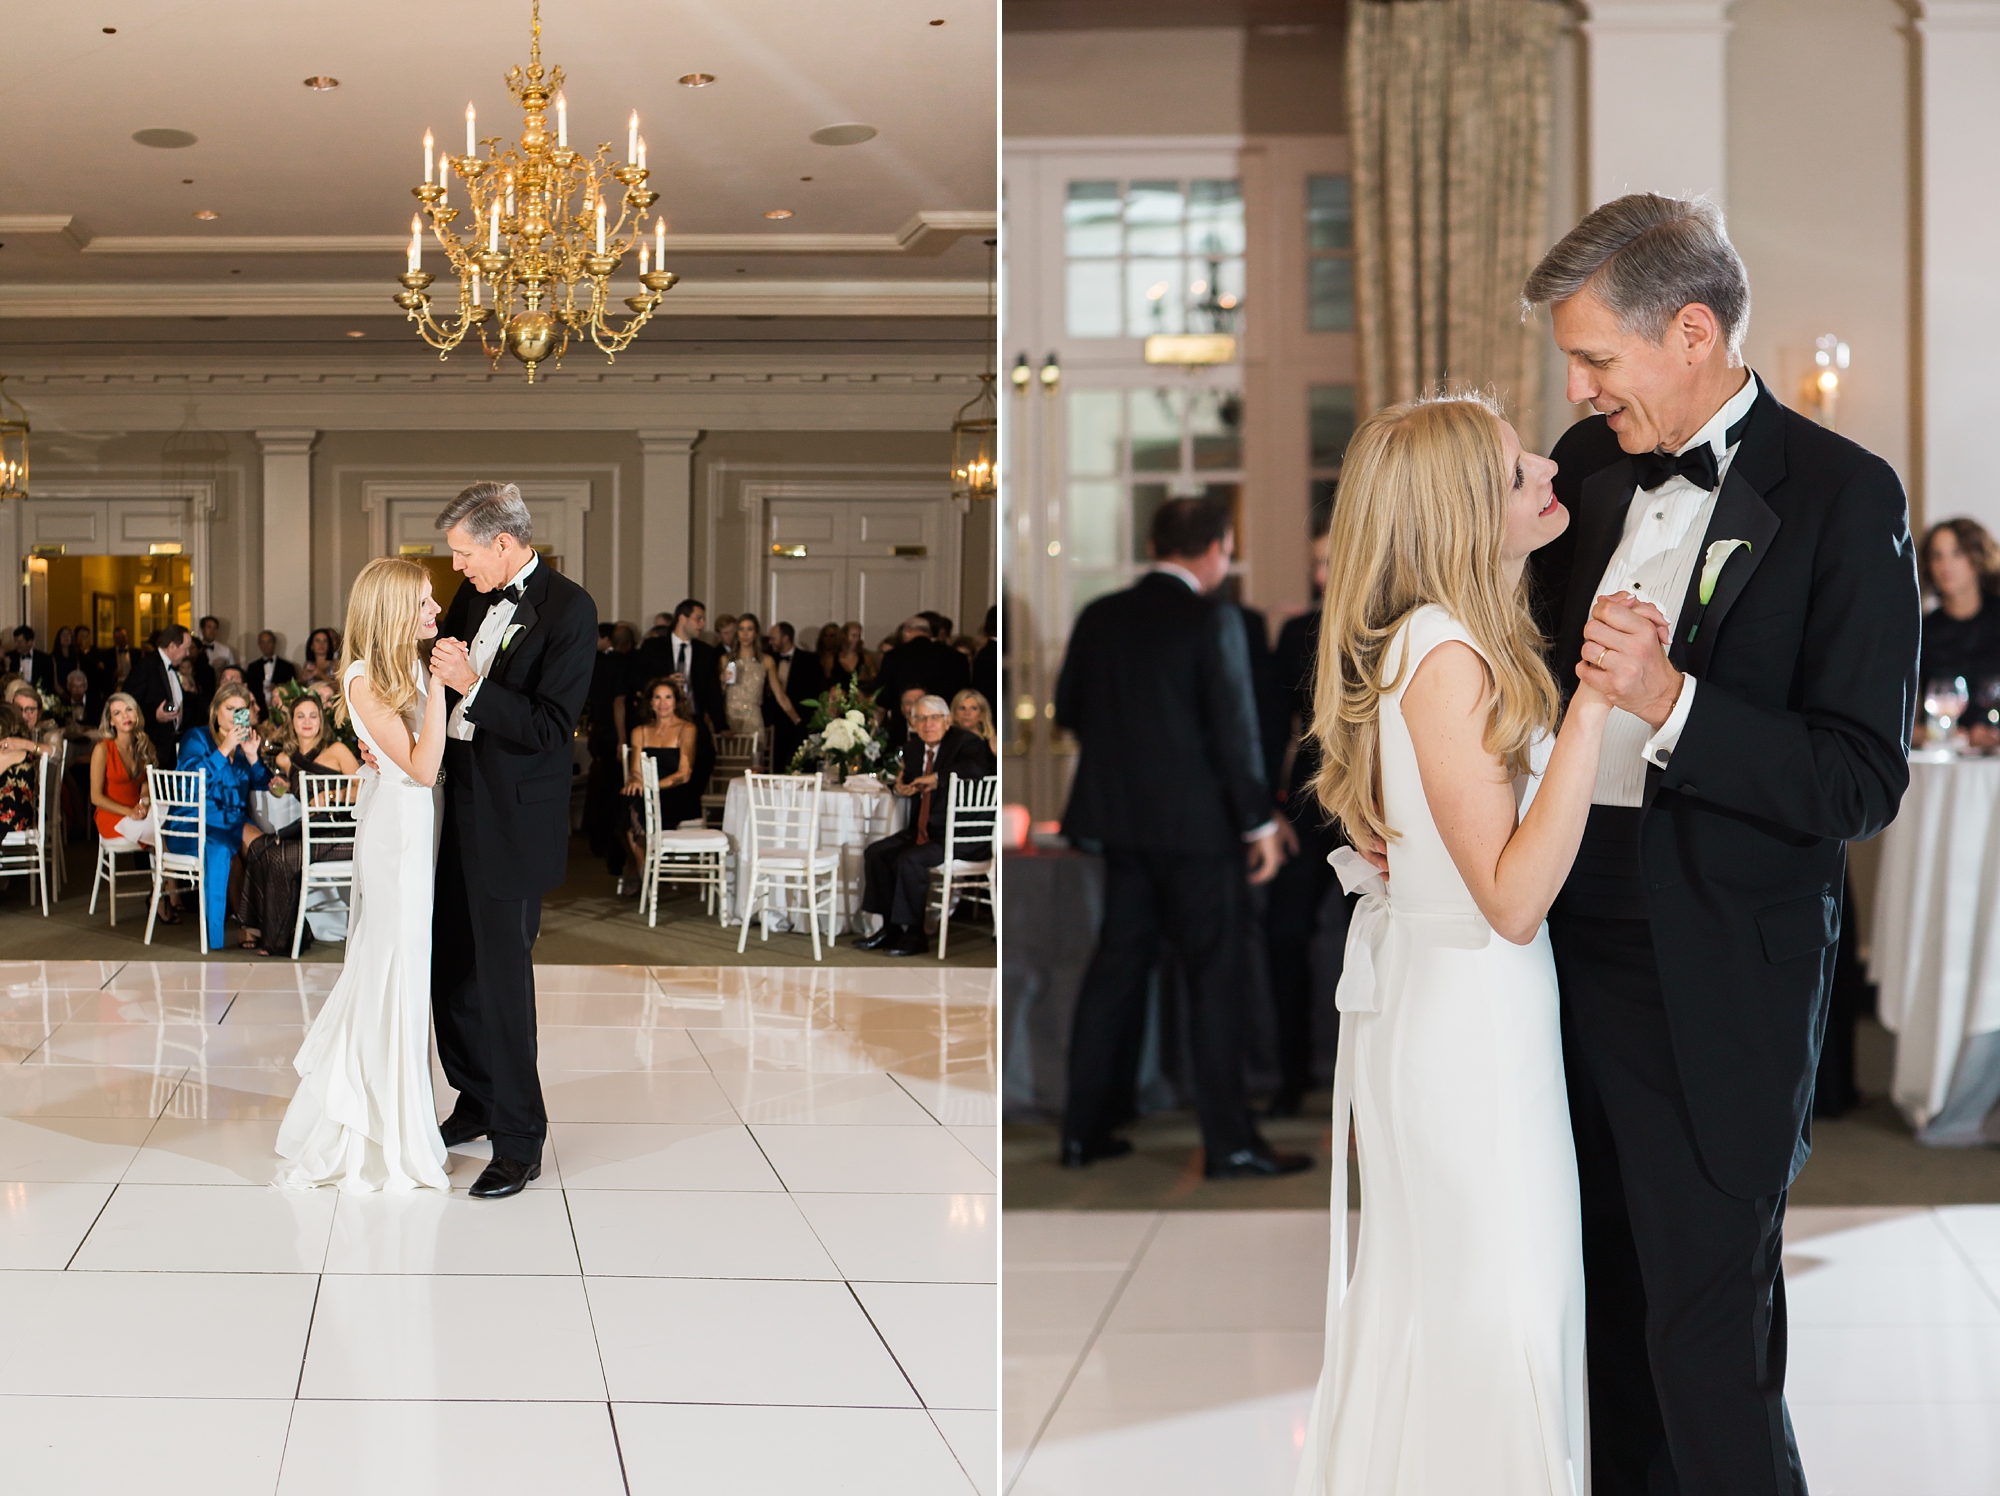 Father daughter dance at prestigious East Lake Golf Club. All photos by Atlanta's Top Wedding Photographer Leigh Wolfe Photography